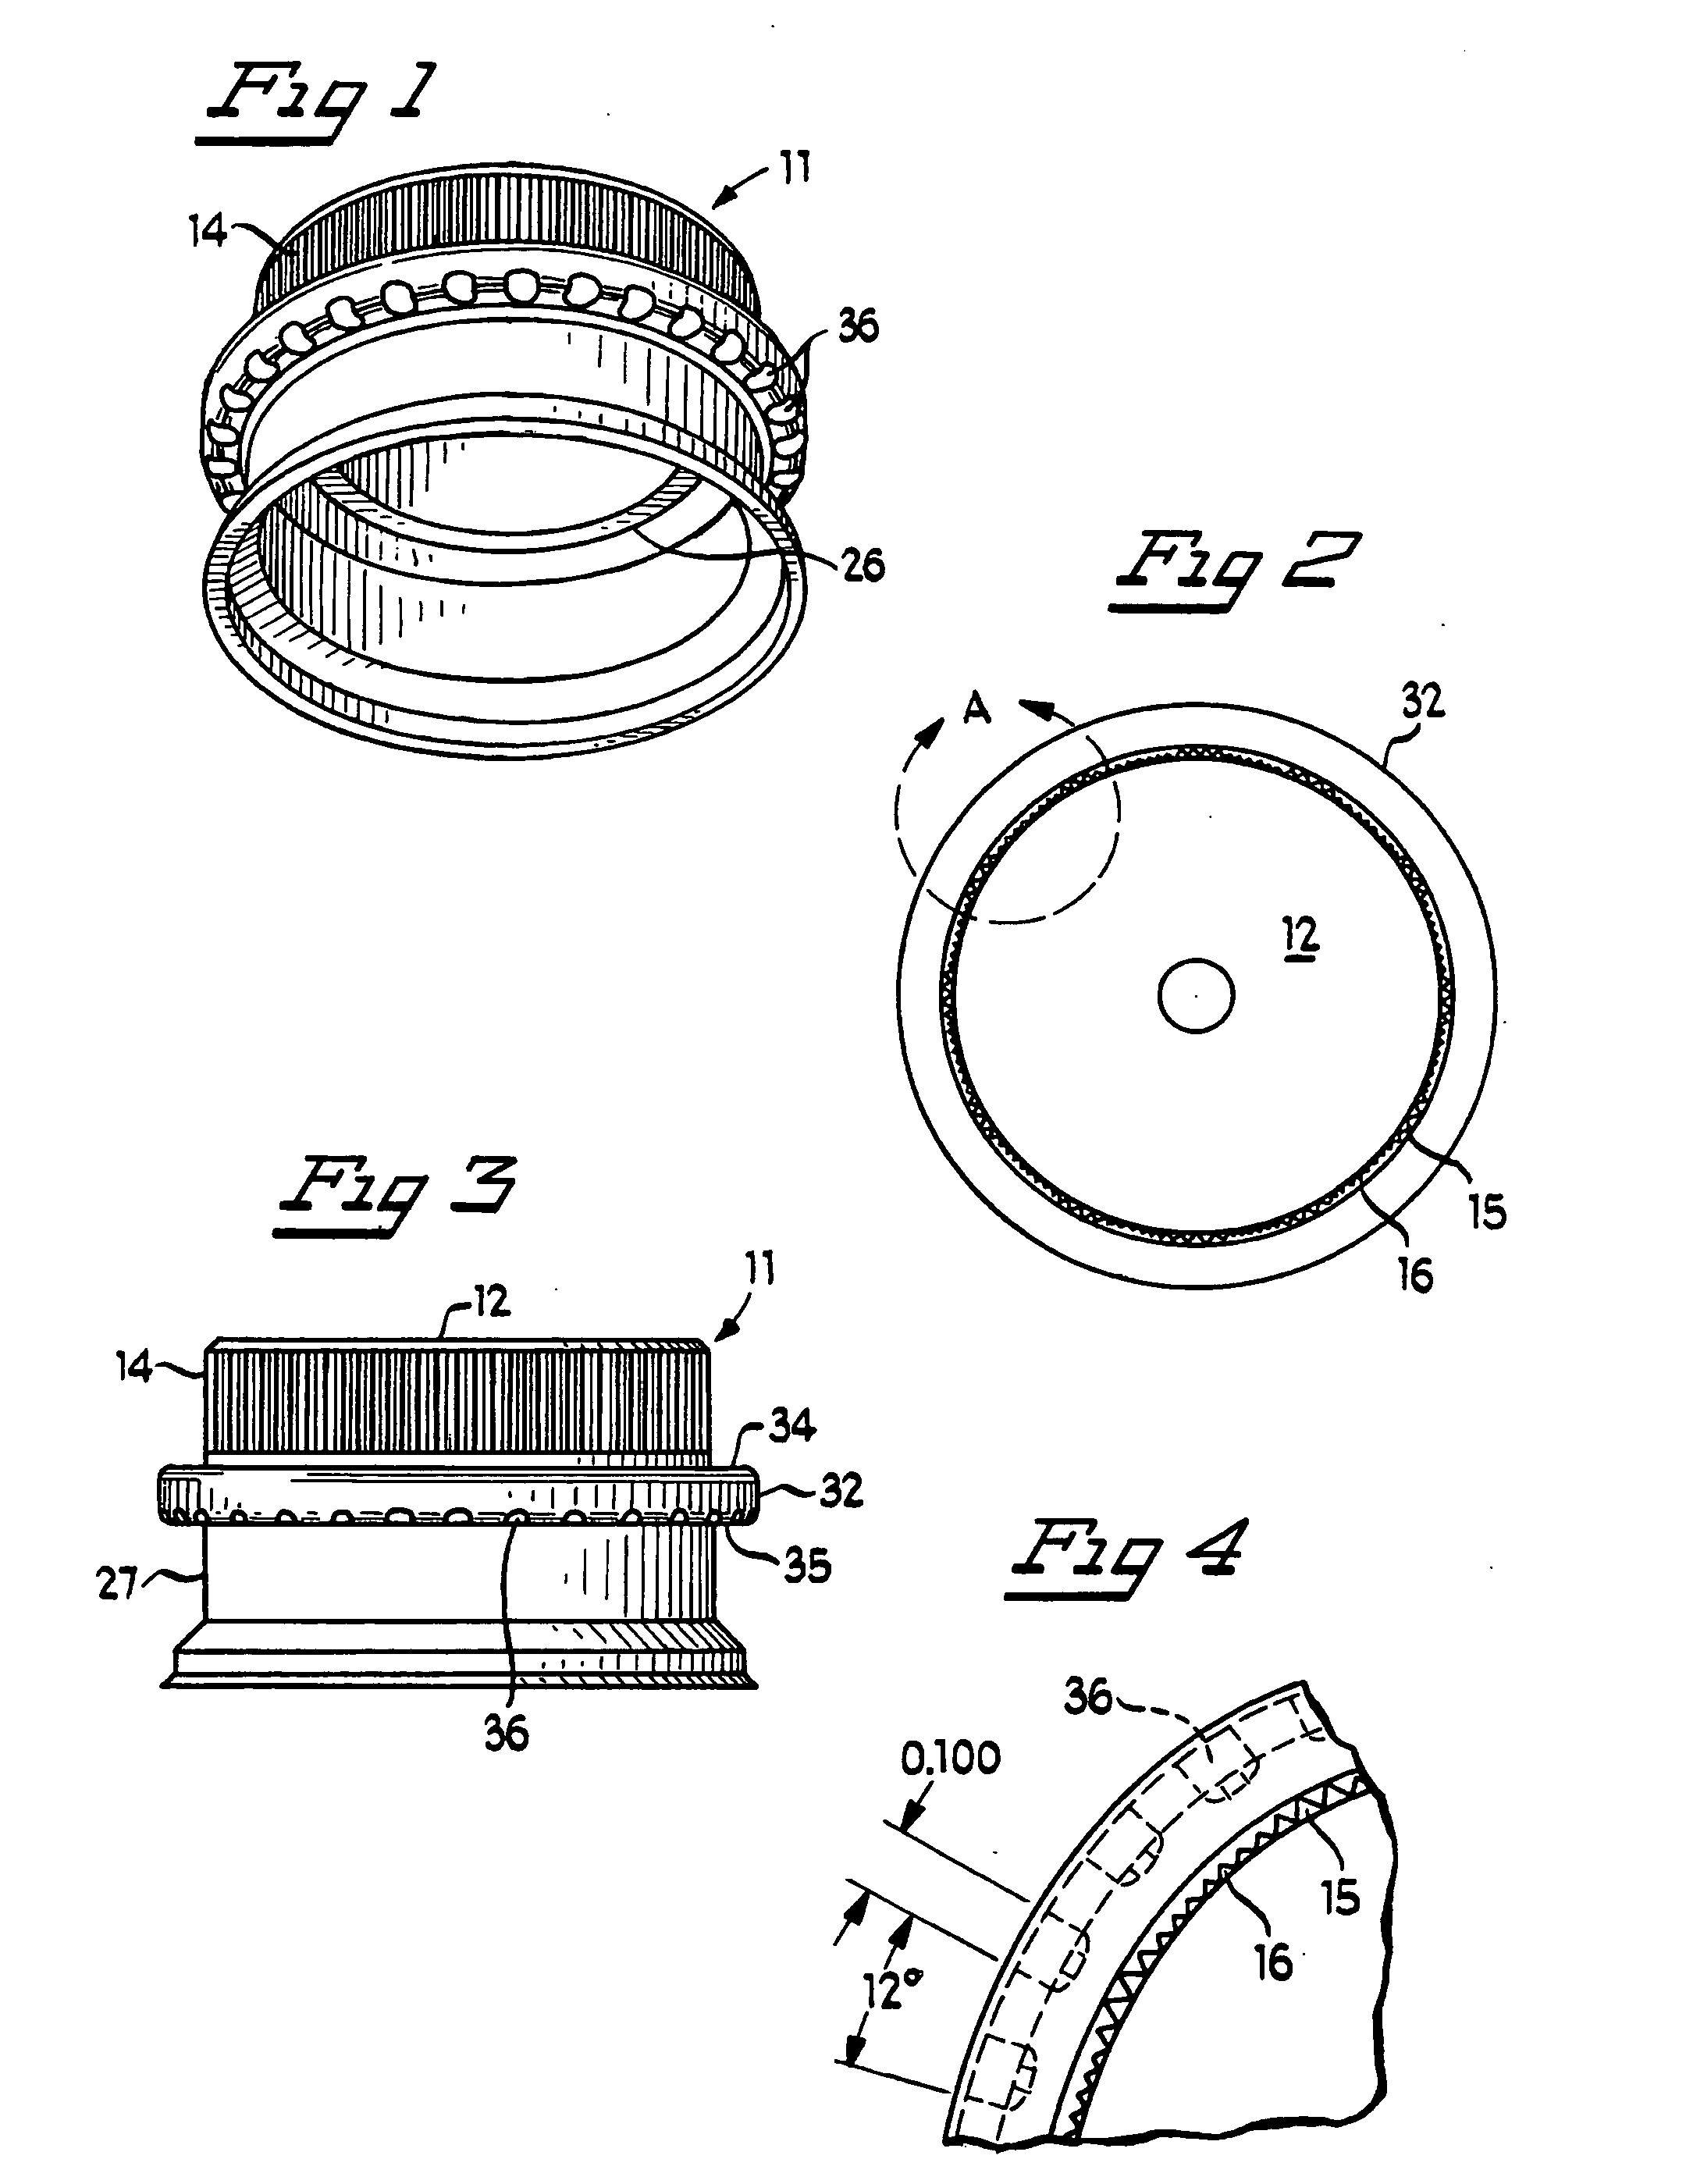 Color-coded closure system with heat attached tamper evidencing band